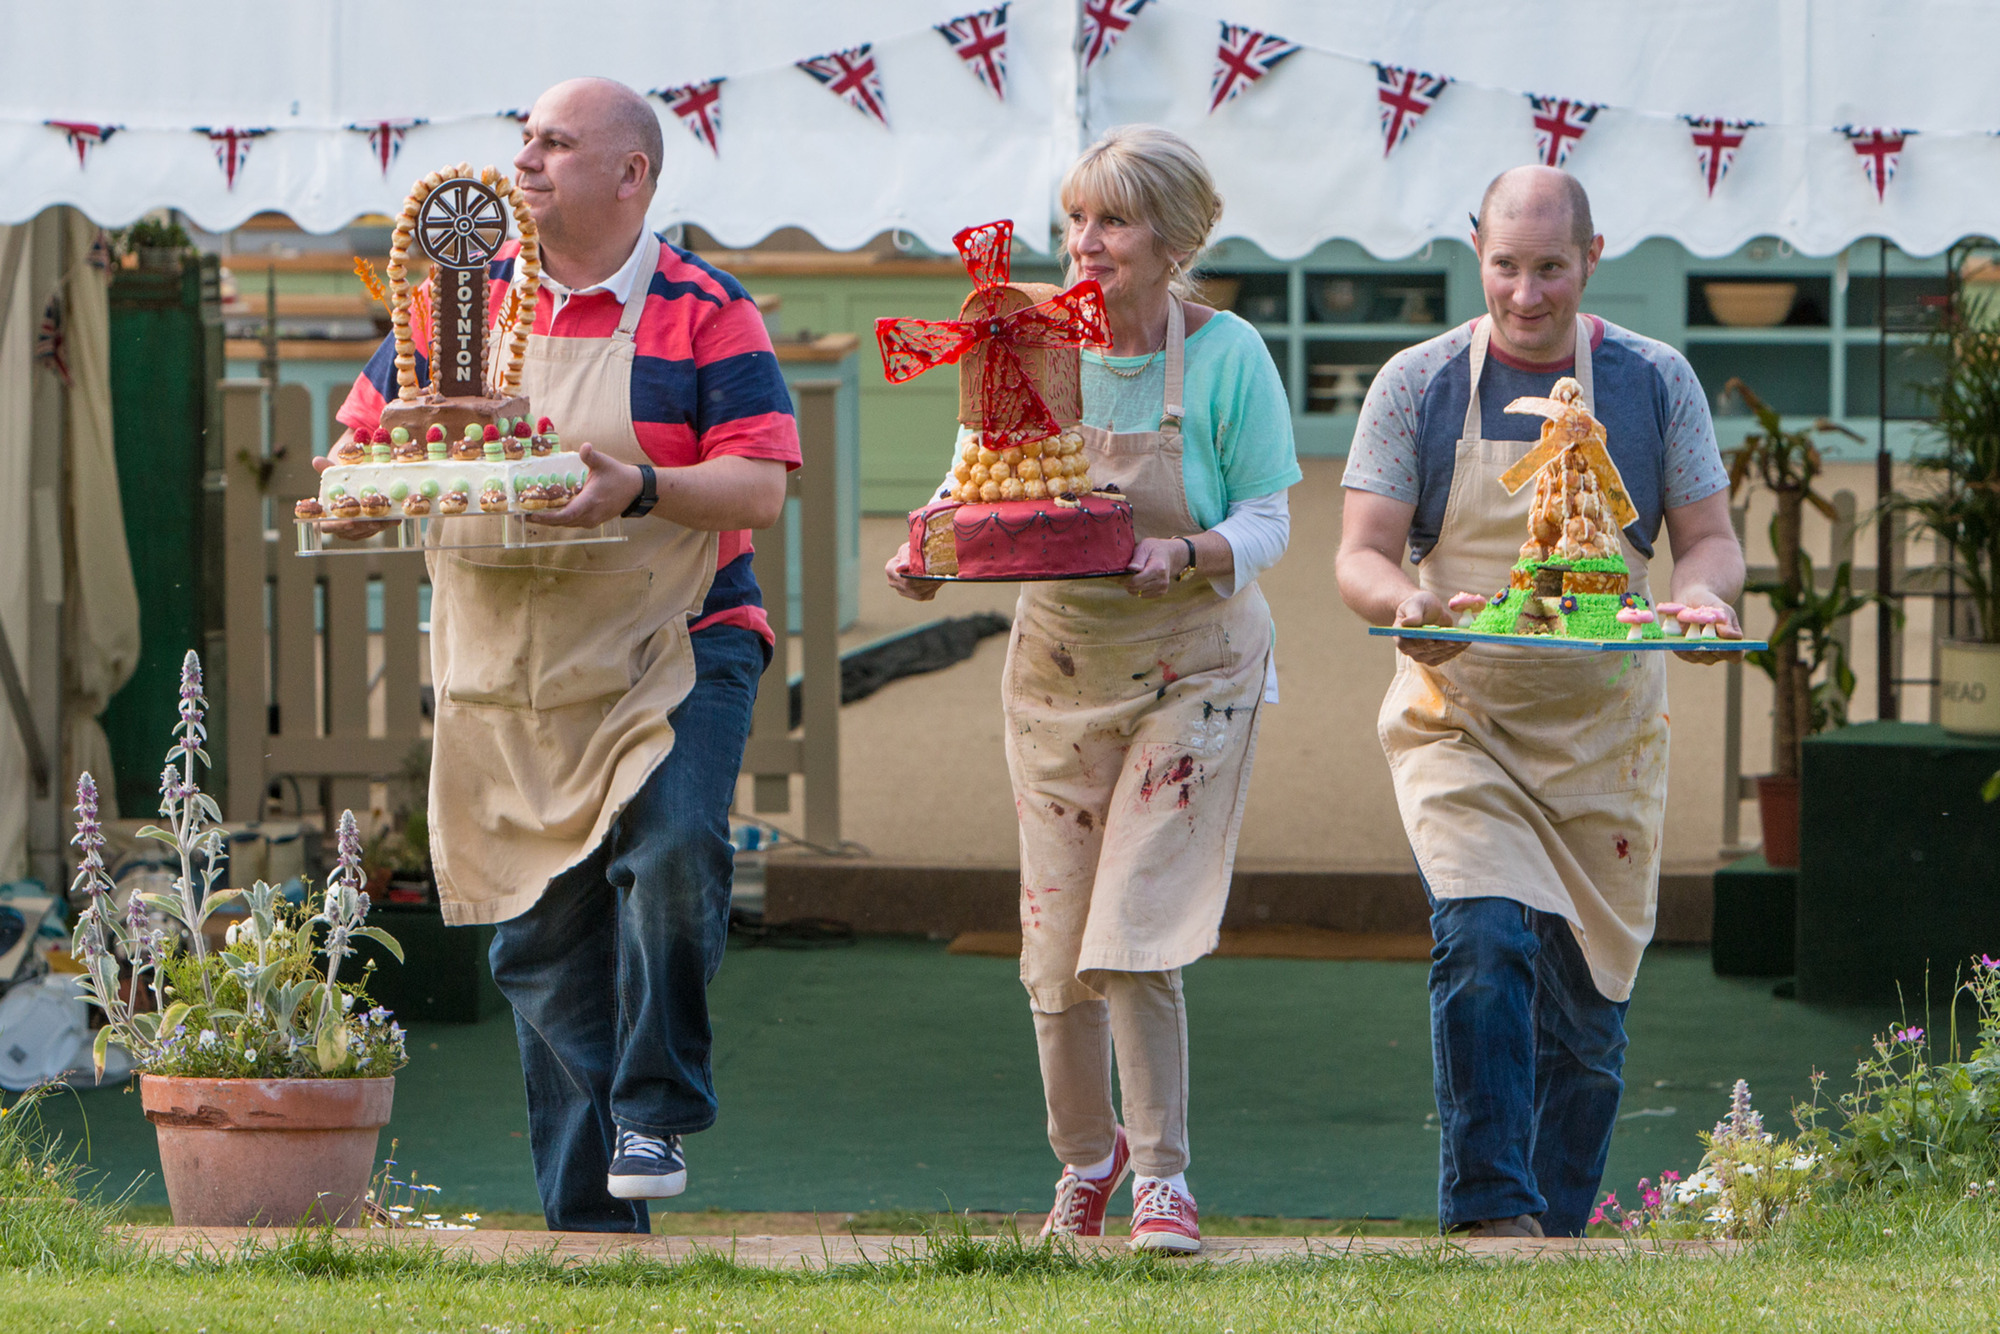 The Great British Bake Off 2014 Final, BBC One